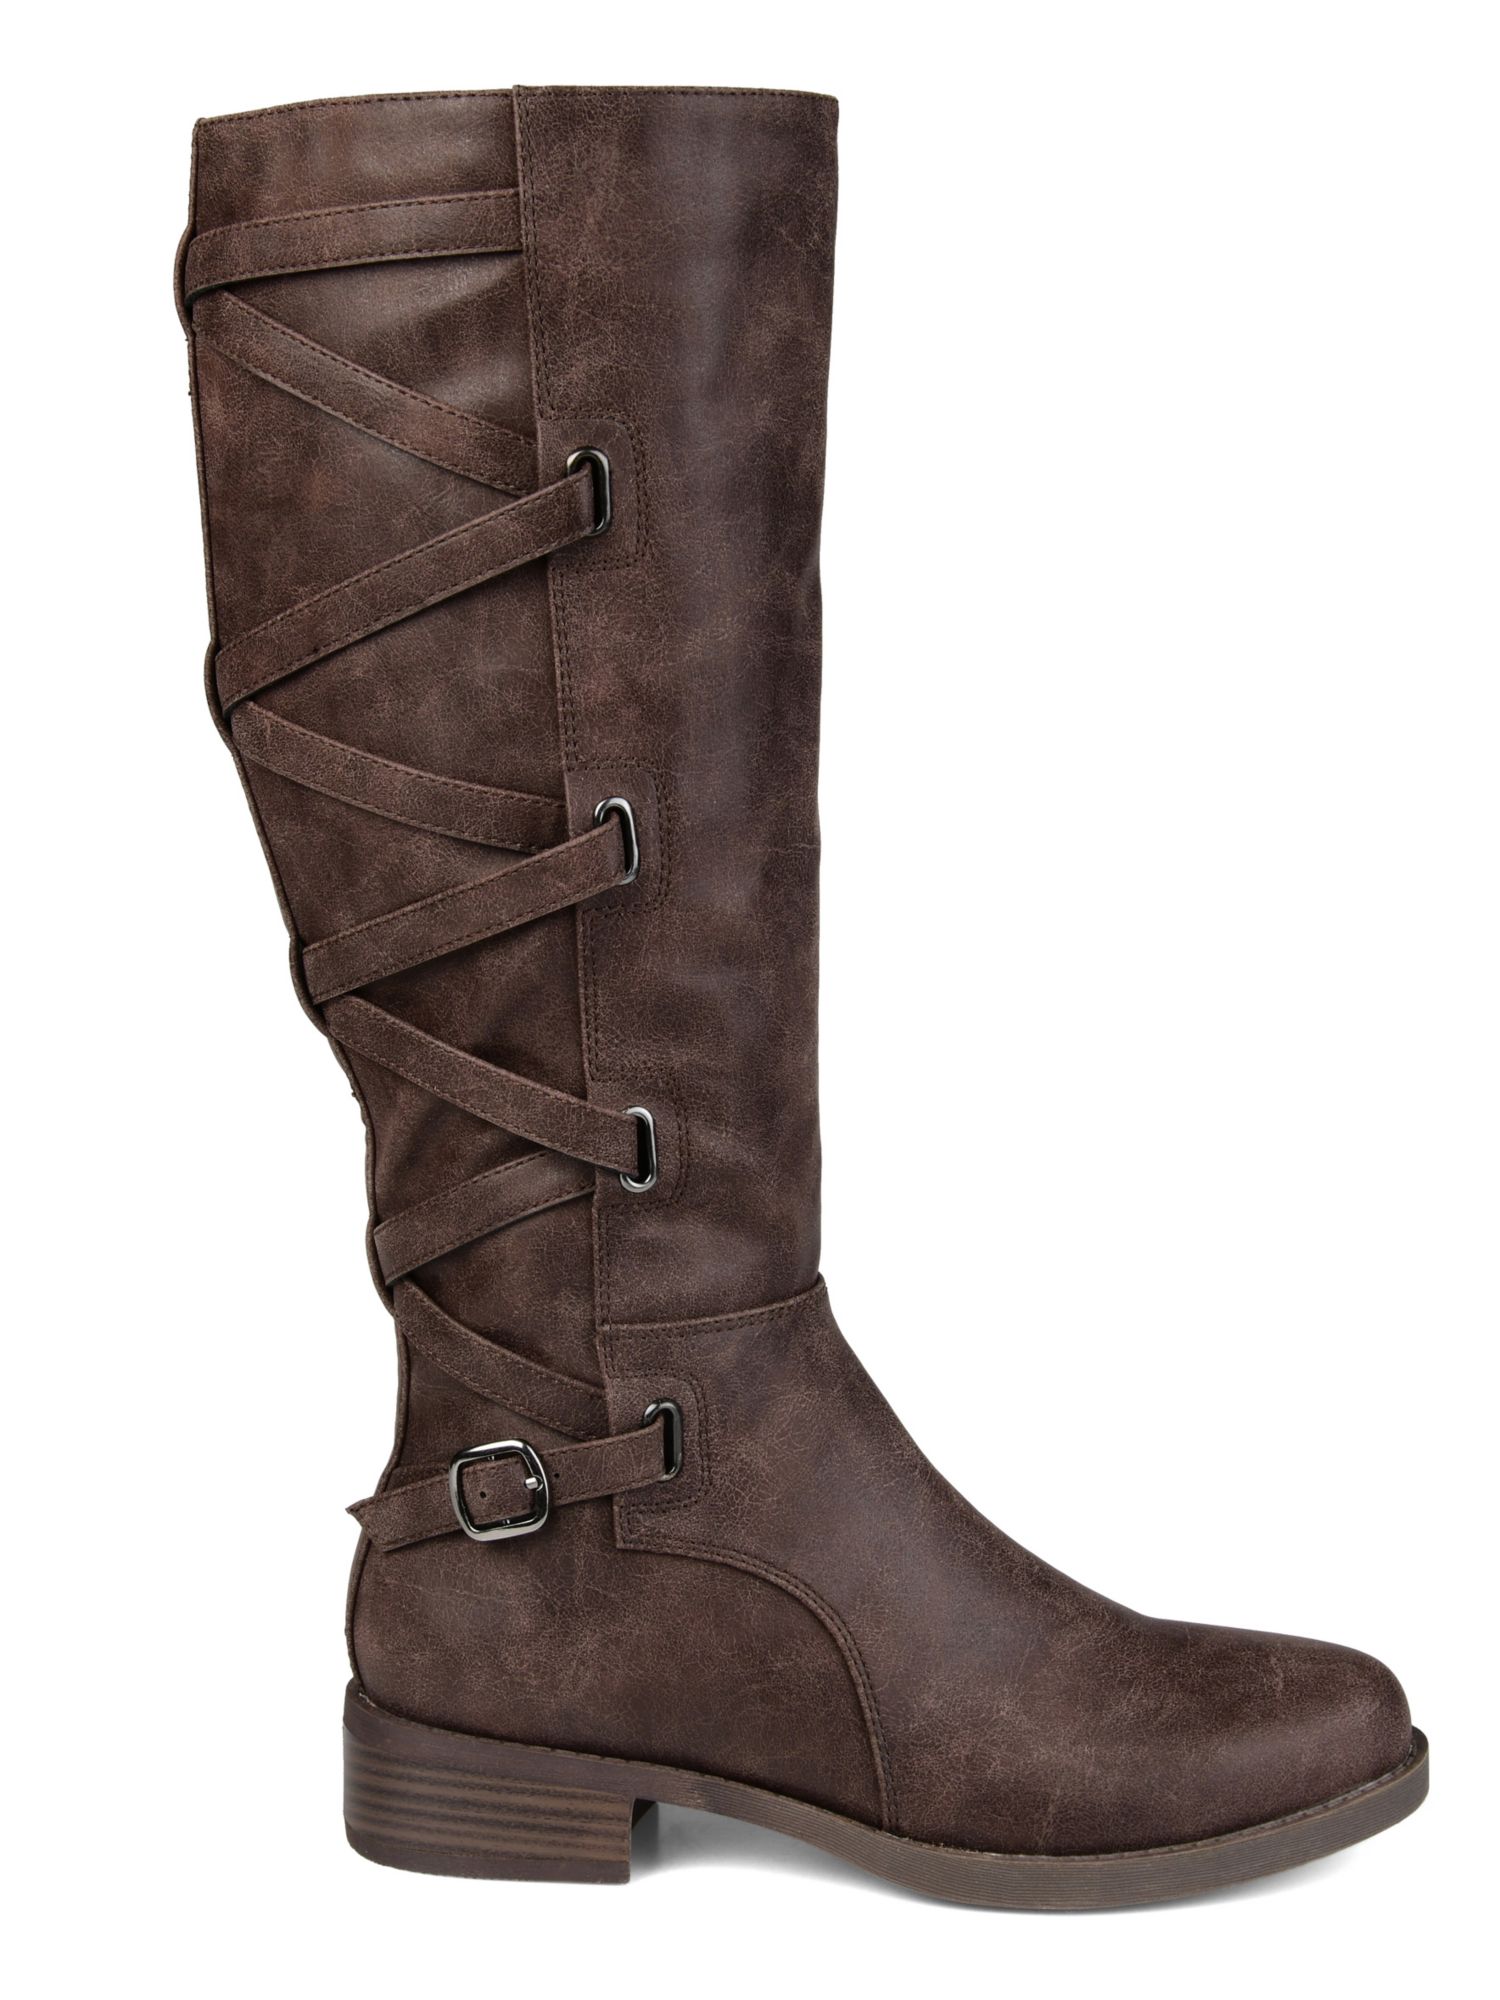 JOURNEE COLLECTION Womens Brown Extra Wide Calf Almond Toe Stacked Heel Zip-Up Boots 6.5